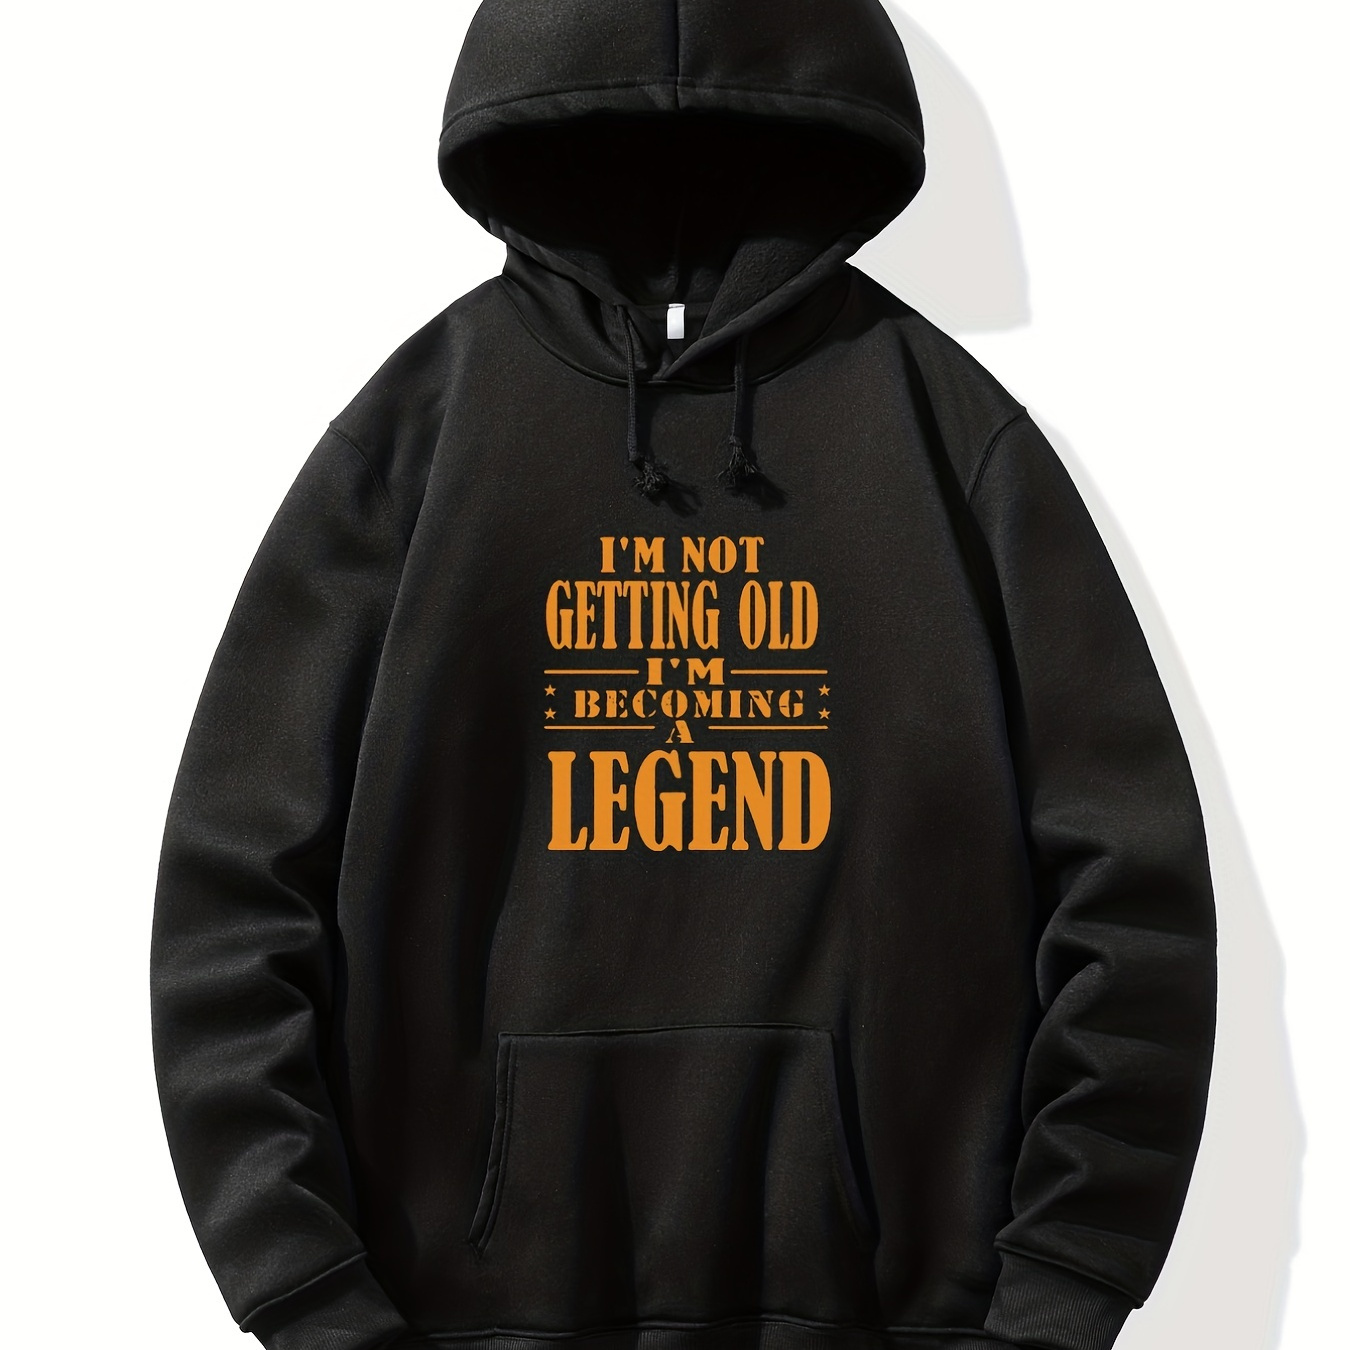 

I Am Becoming A Legend Slogan Print Hoodie, Hoodies Top For Men, Men’s Casual Pullover Hooded Graphic Design Sweatshirt With Kangaroo Pocket For Spring Fall, As Gifts